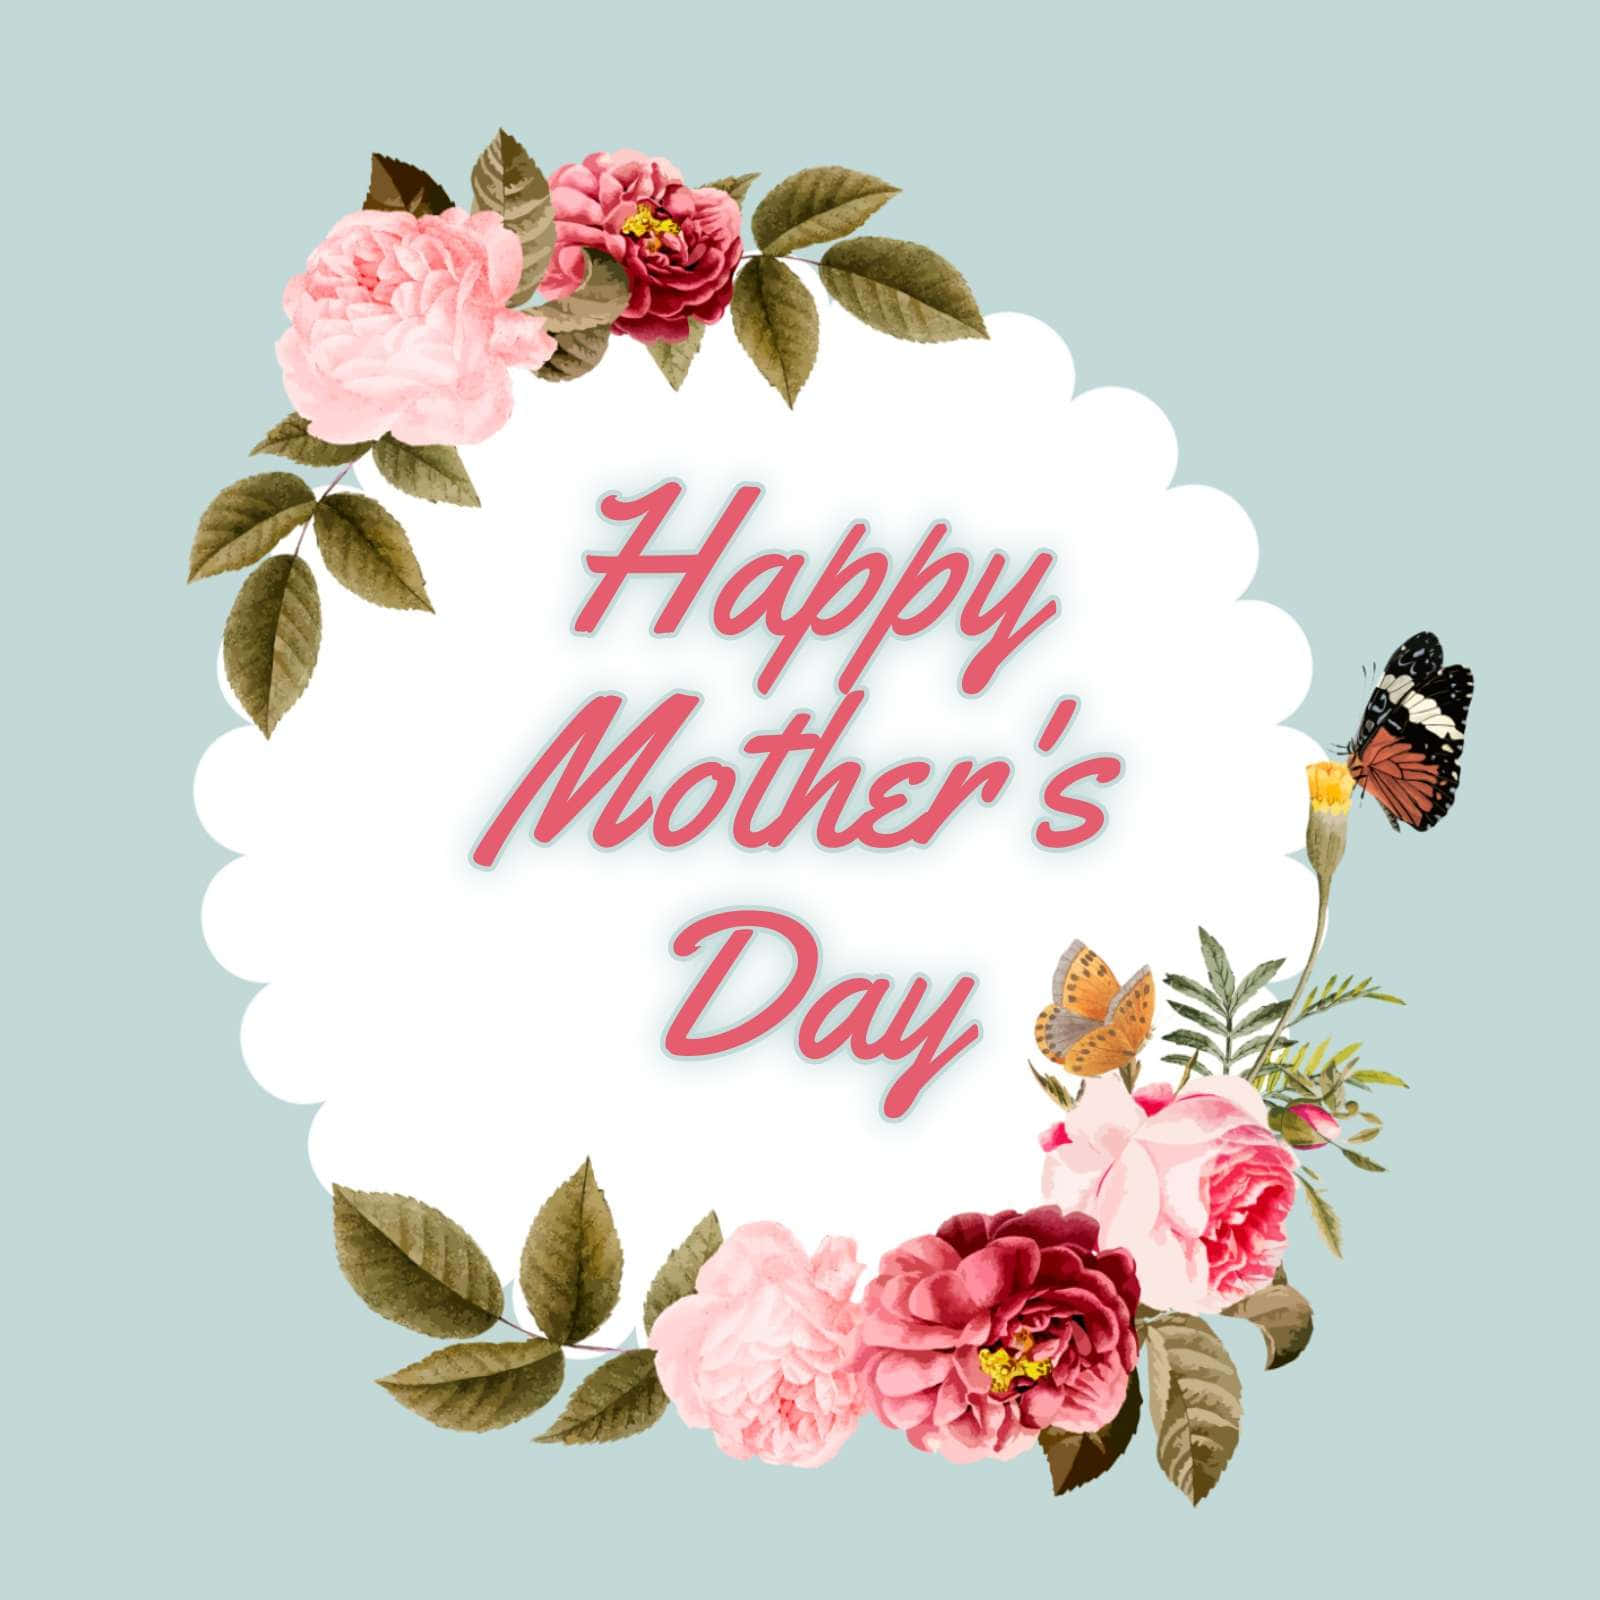 Happy Mothers Day Cake Design Hd Wallpaper